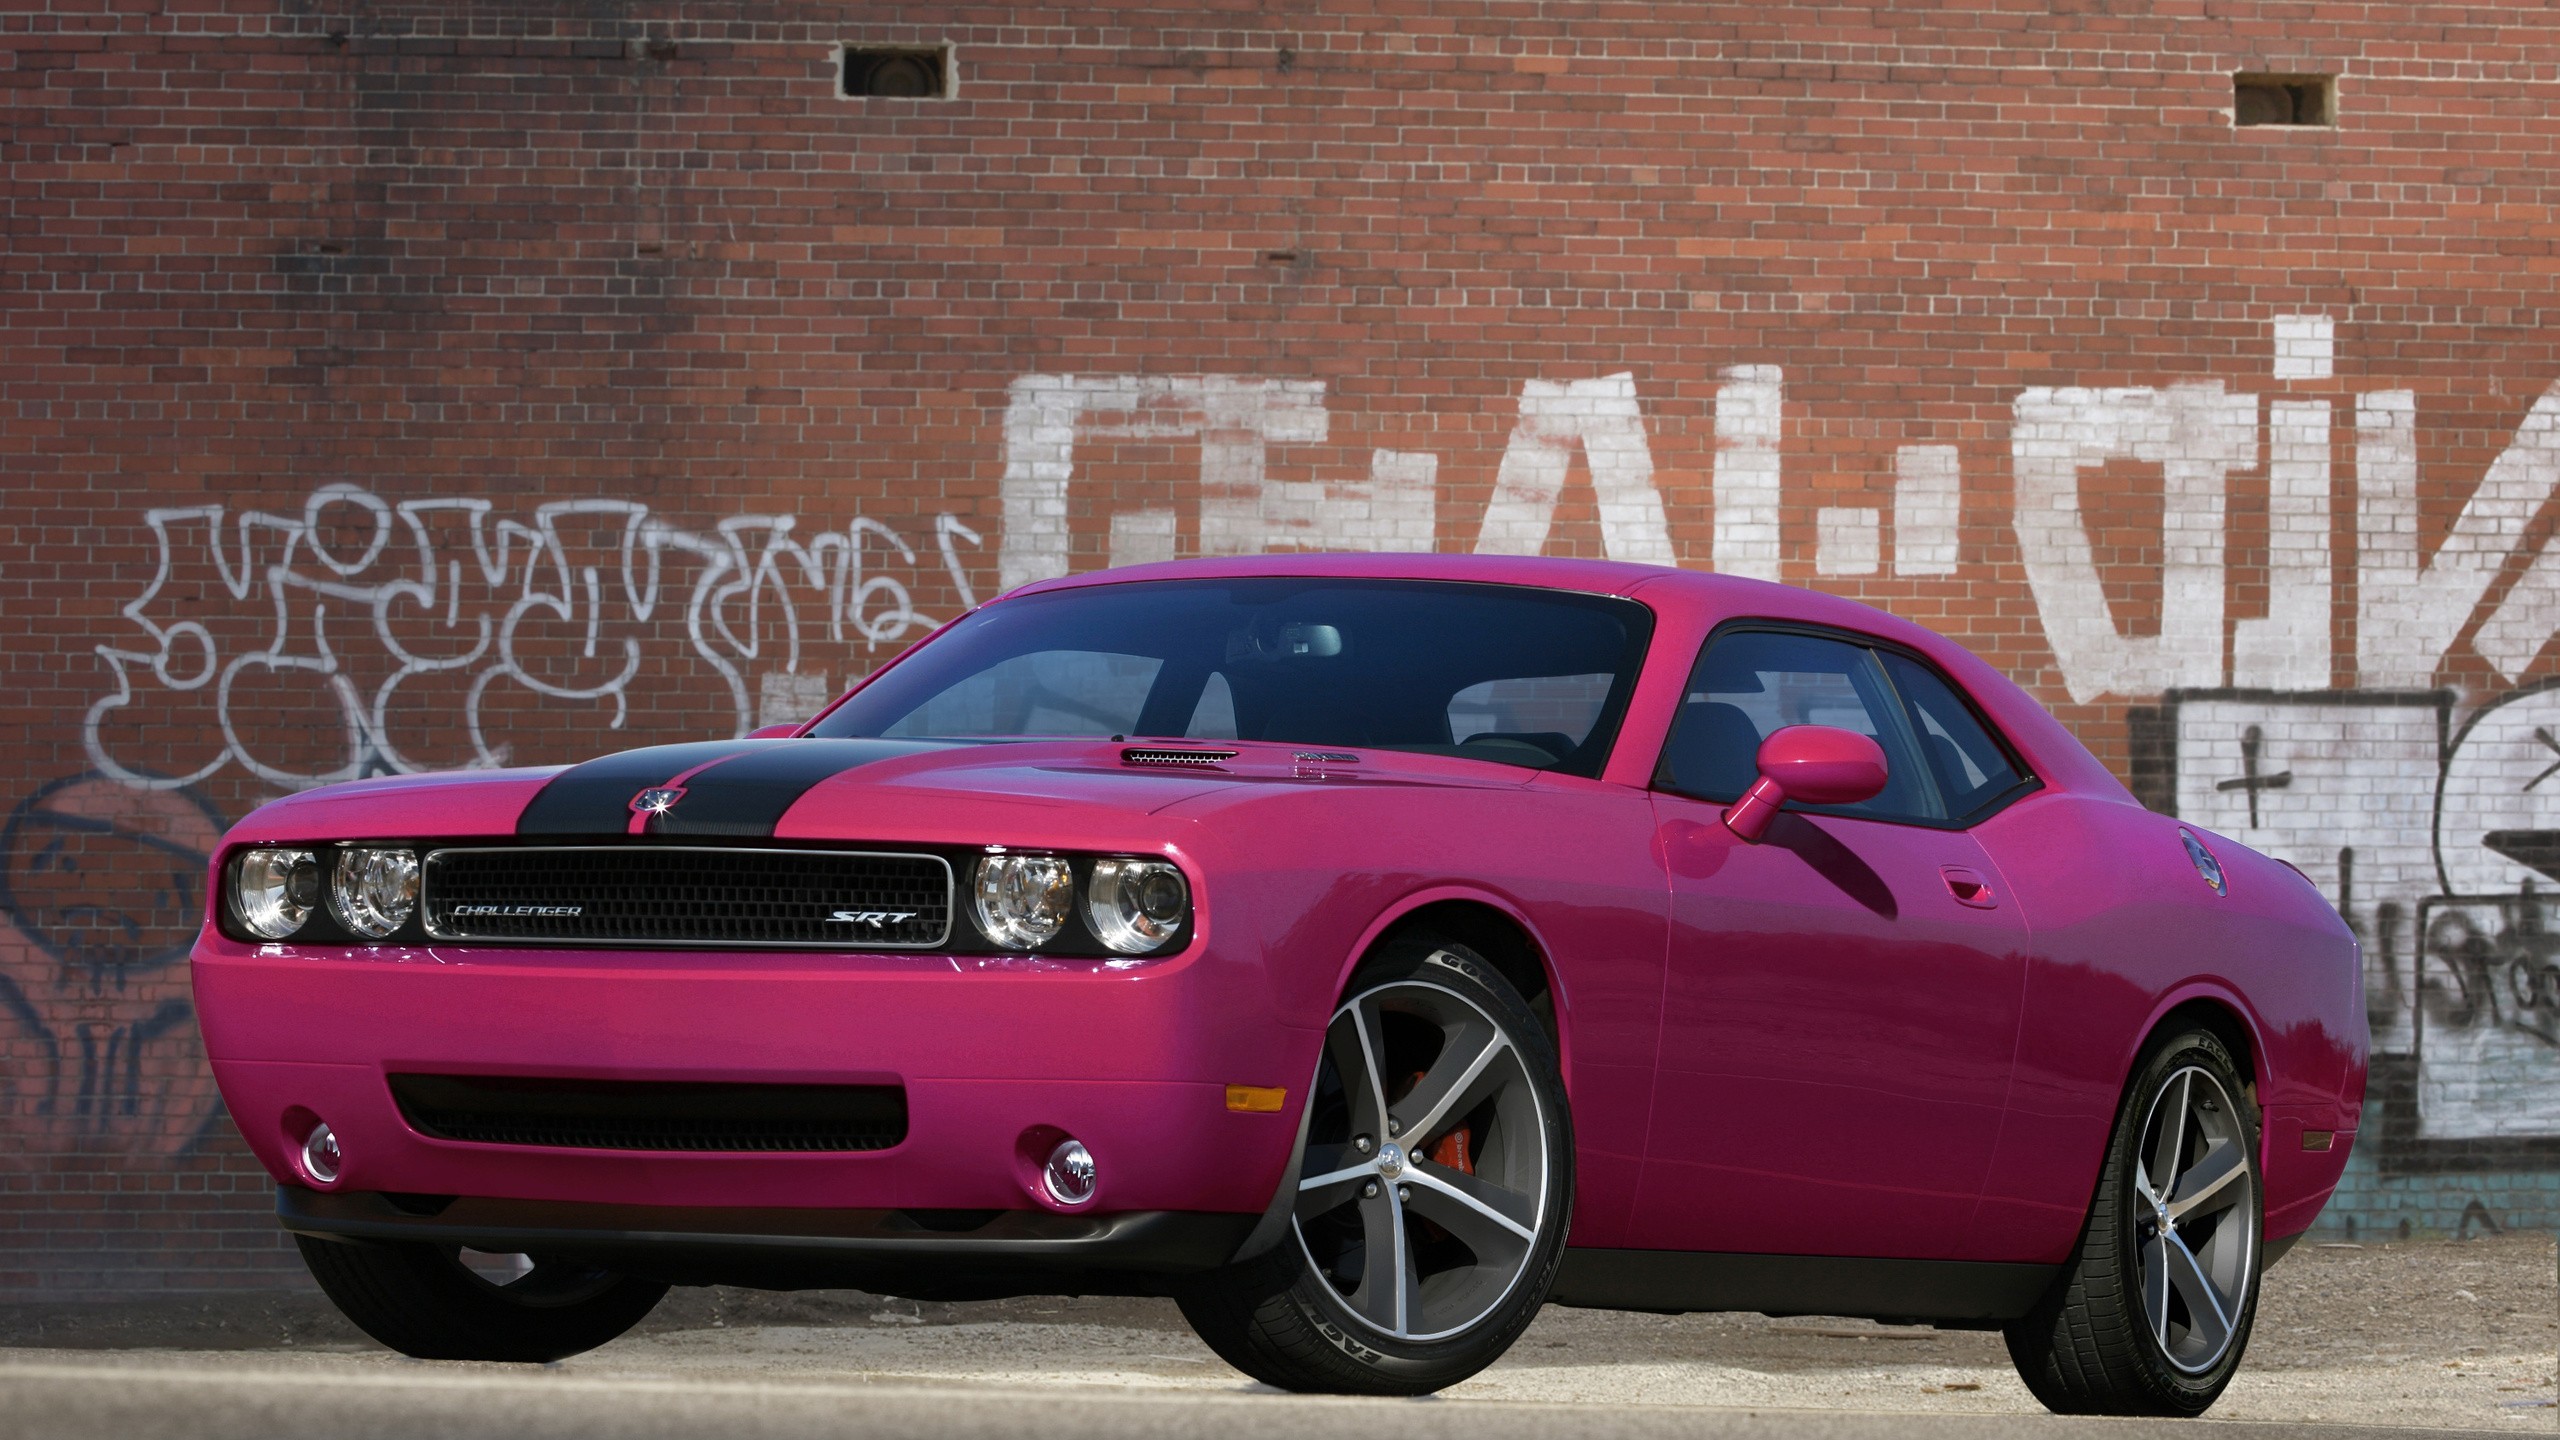 General 2560x1440 car pink Dodge Dodge Challenger muscle cars American cars Stellantis racing stripes